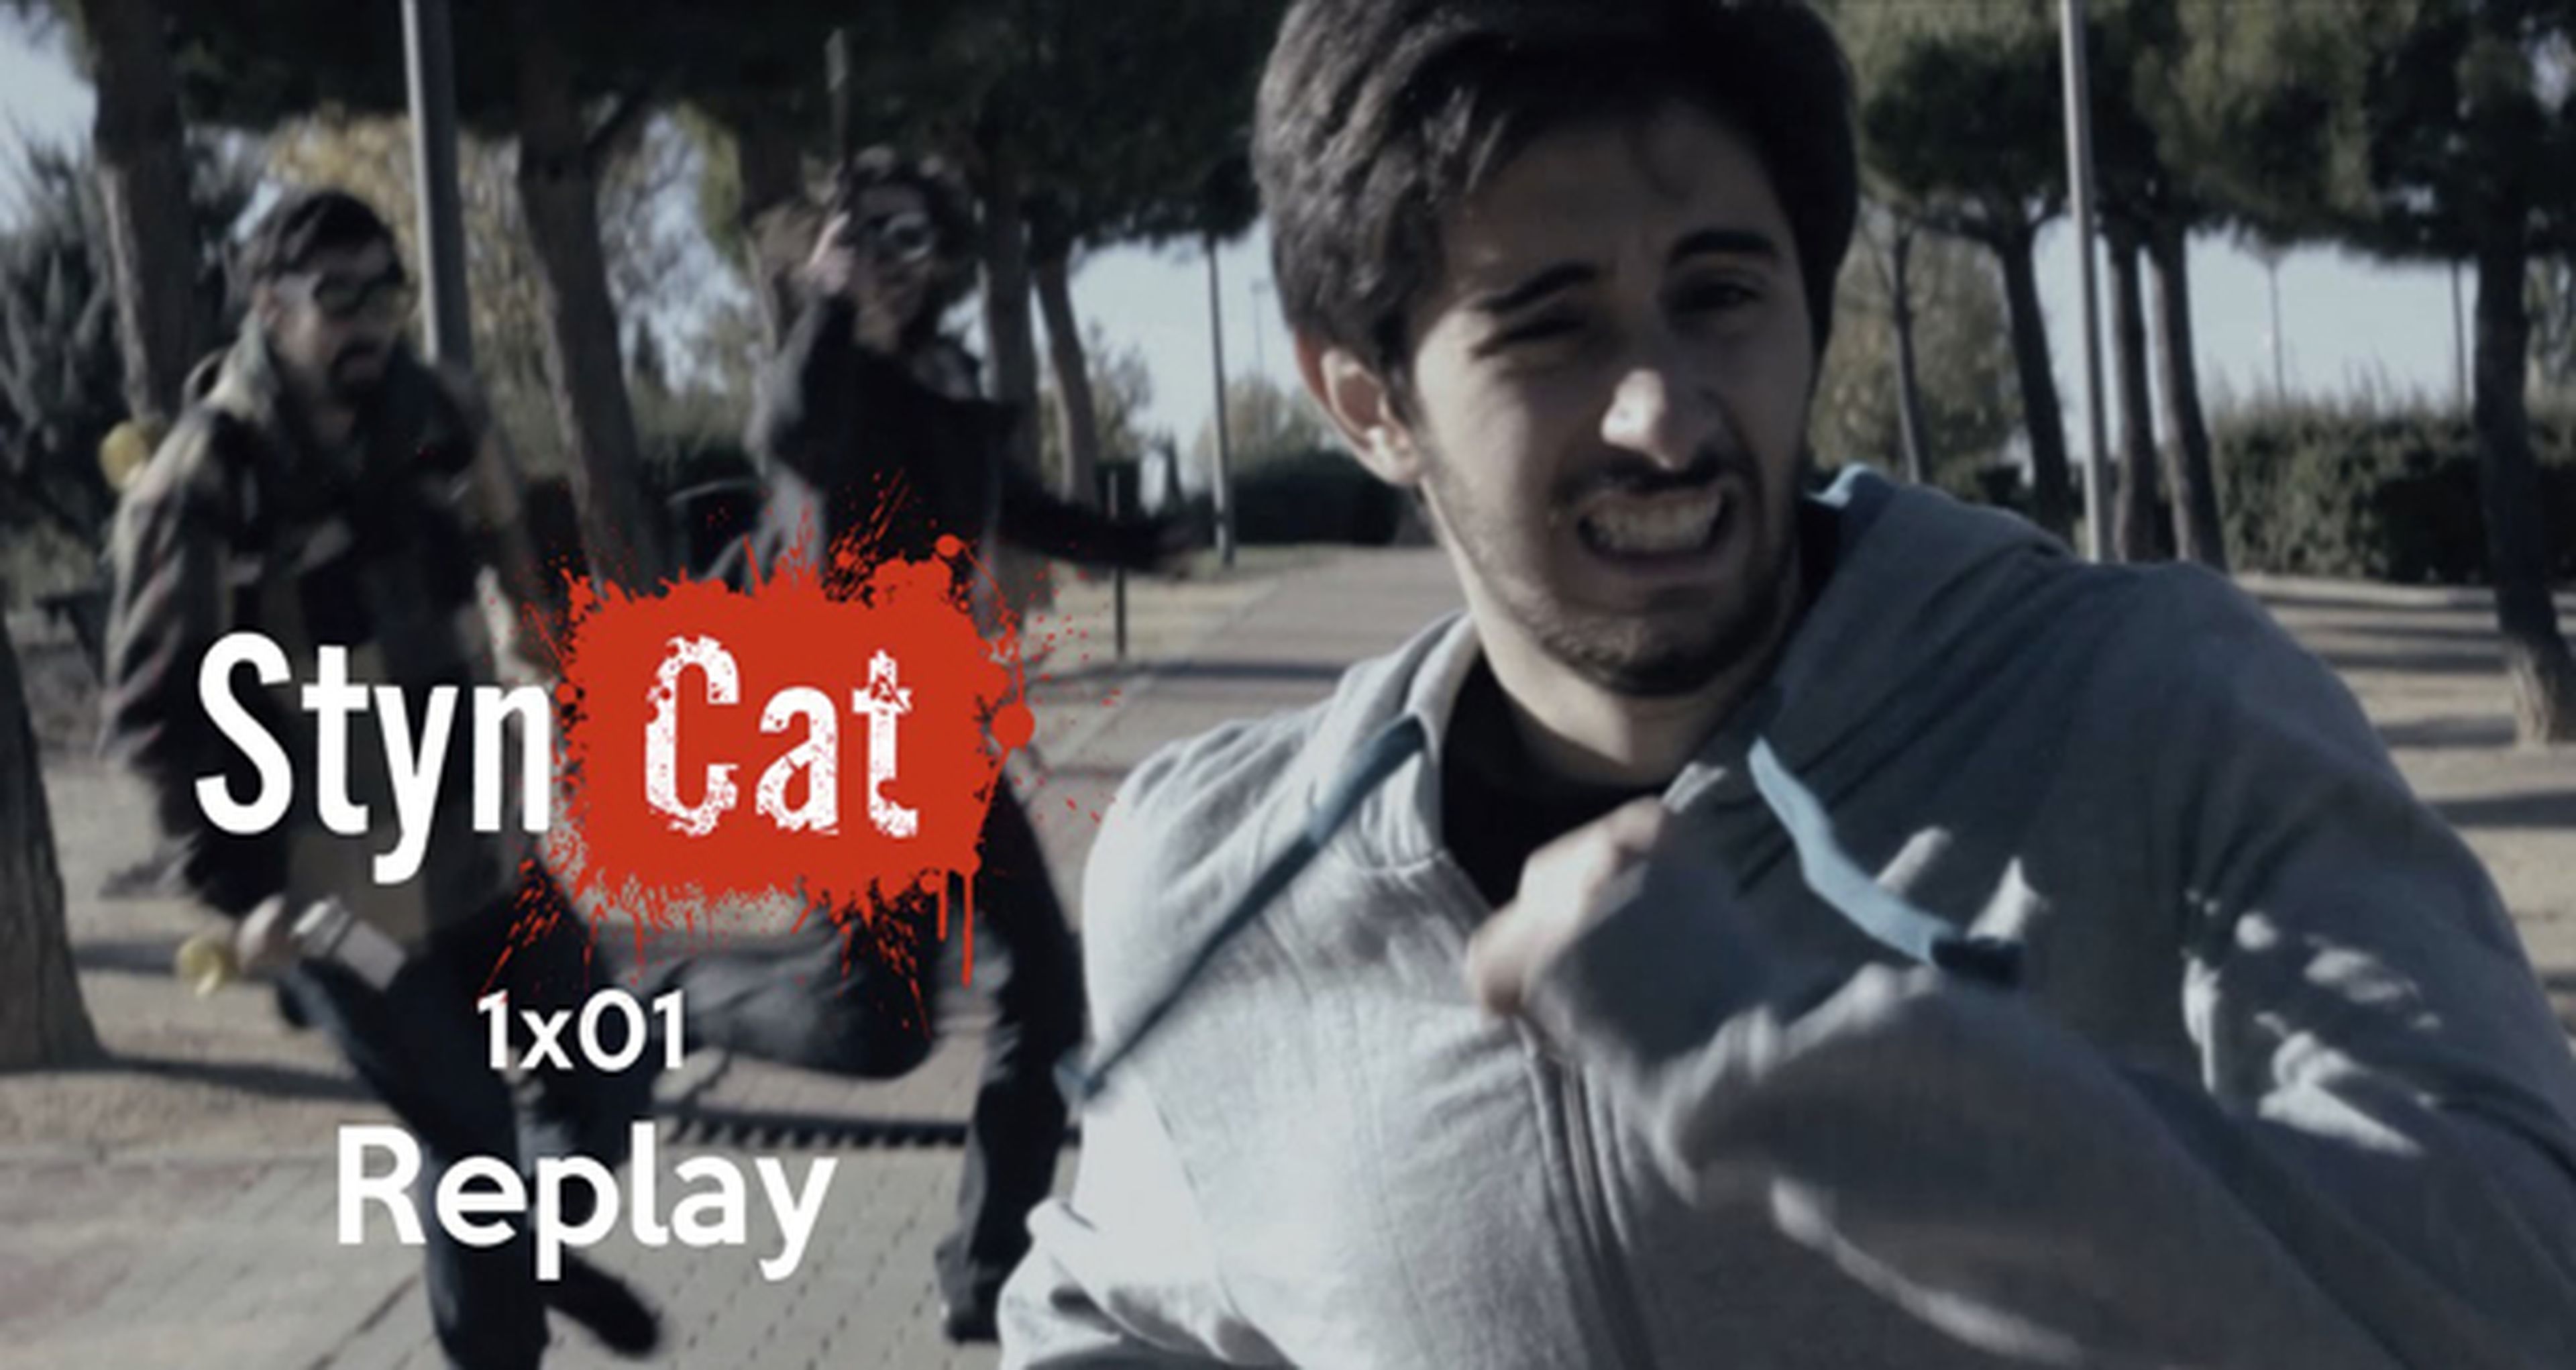 Styncat: youtubers, gatos con guitarra y hipsters asesinos